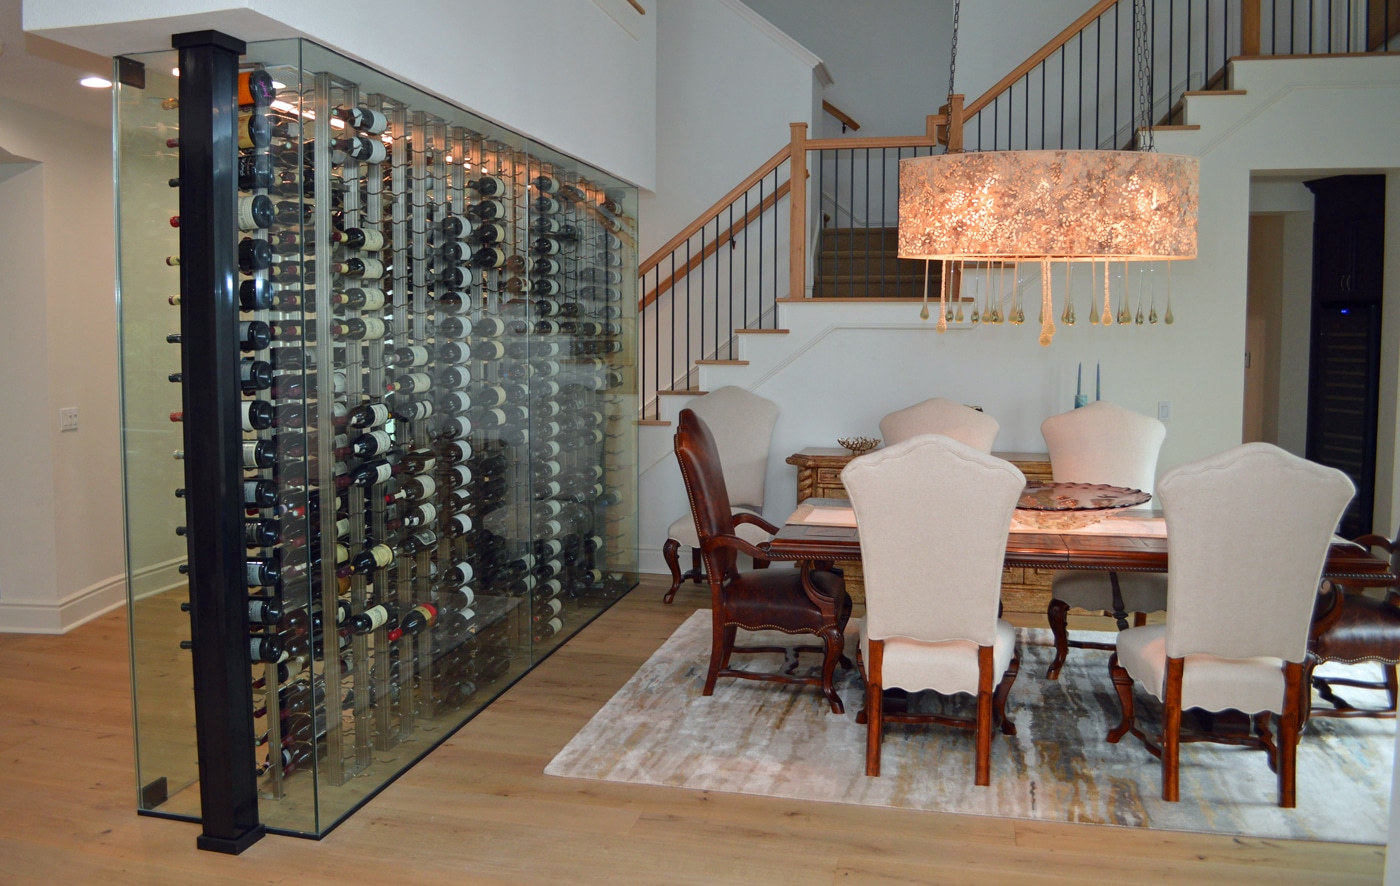 Wall Wine Rack In Dining Room